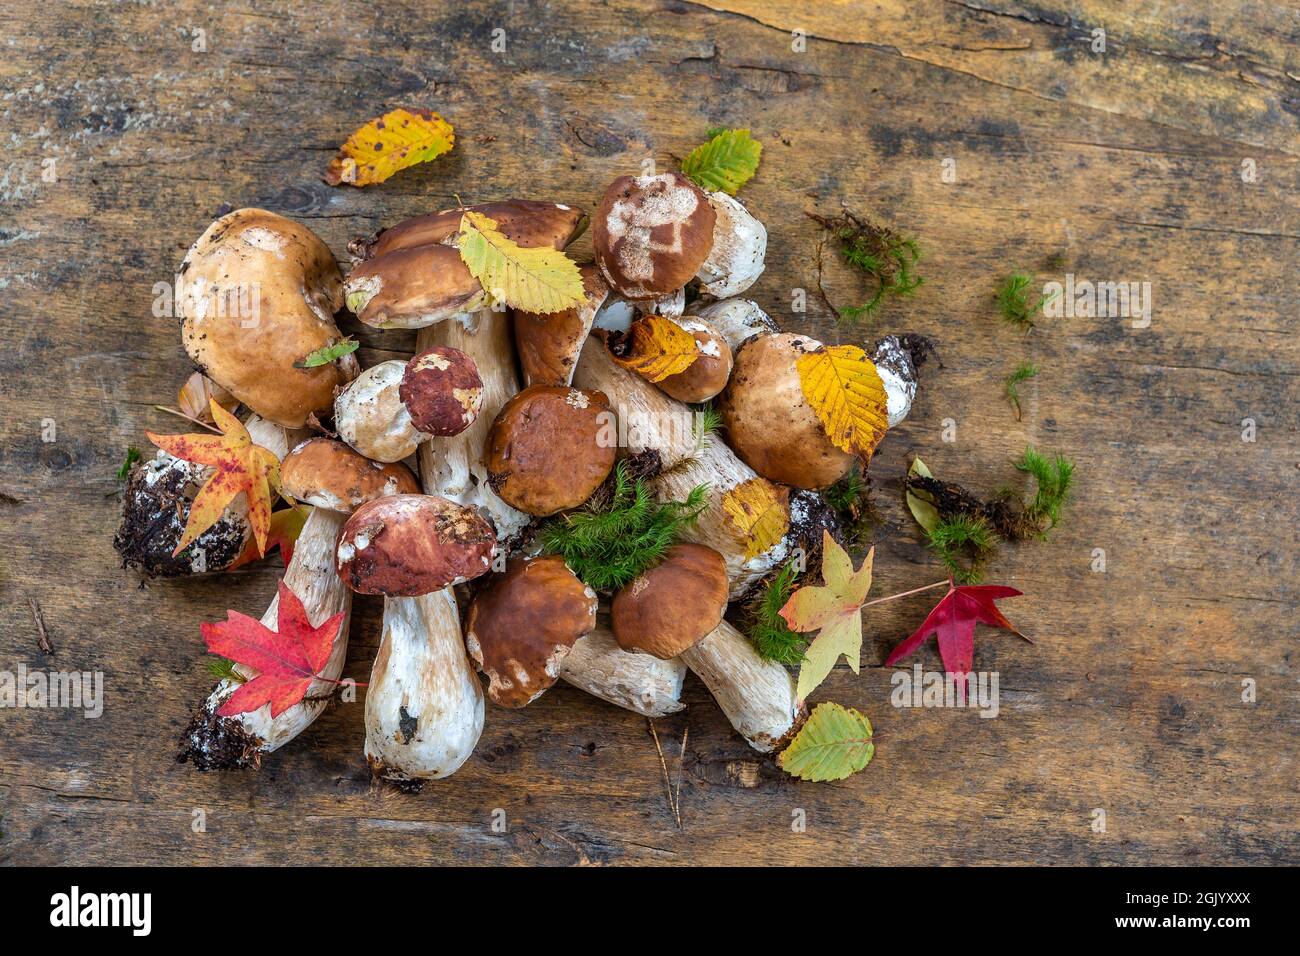 Wild mushrooms: cepes freshly picked on old wooden board Stock Photo